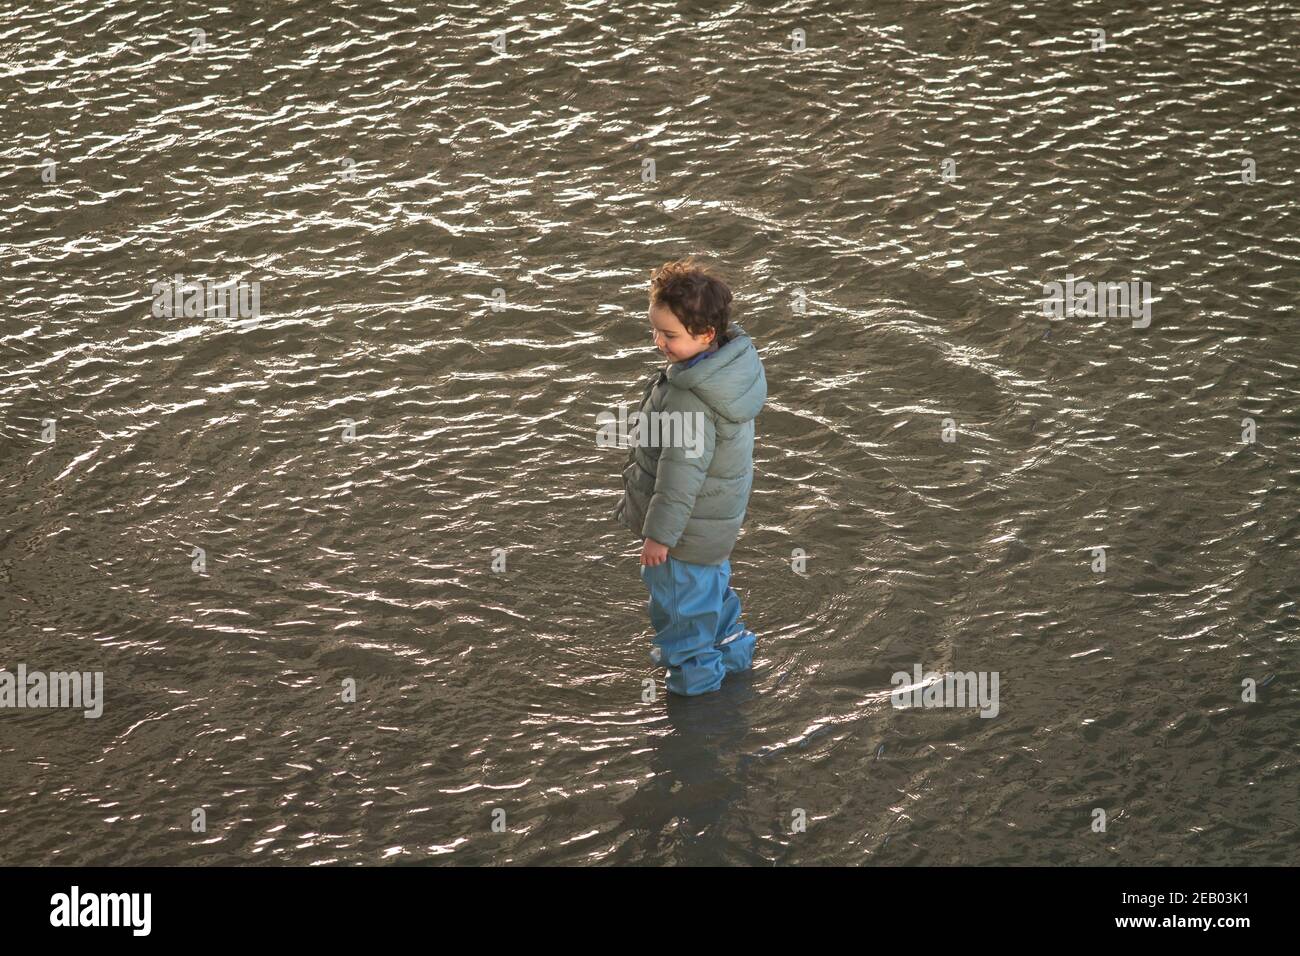 flood of the Rhine on February 4th. 2021, child stands in the water on the flooded banks of the Rhine in Deutz, Cologne, Germany.  Hochwasser des Rhei Stock Photo